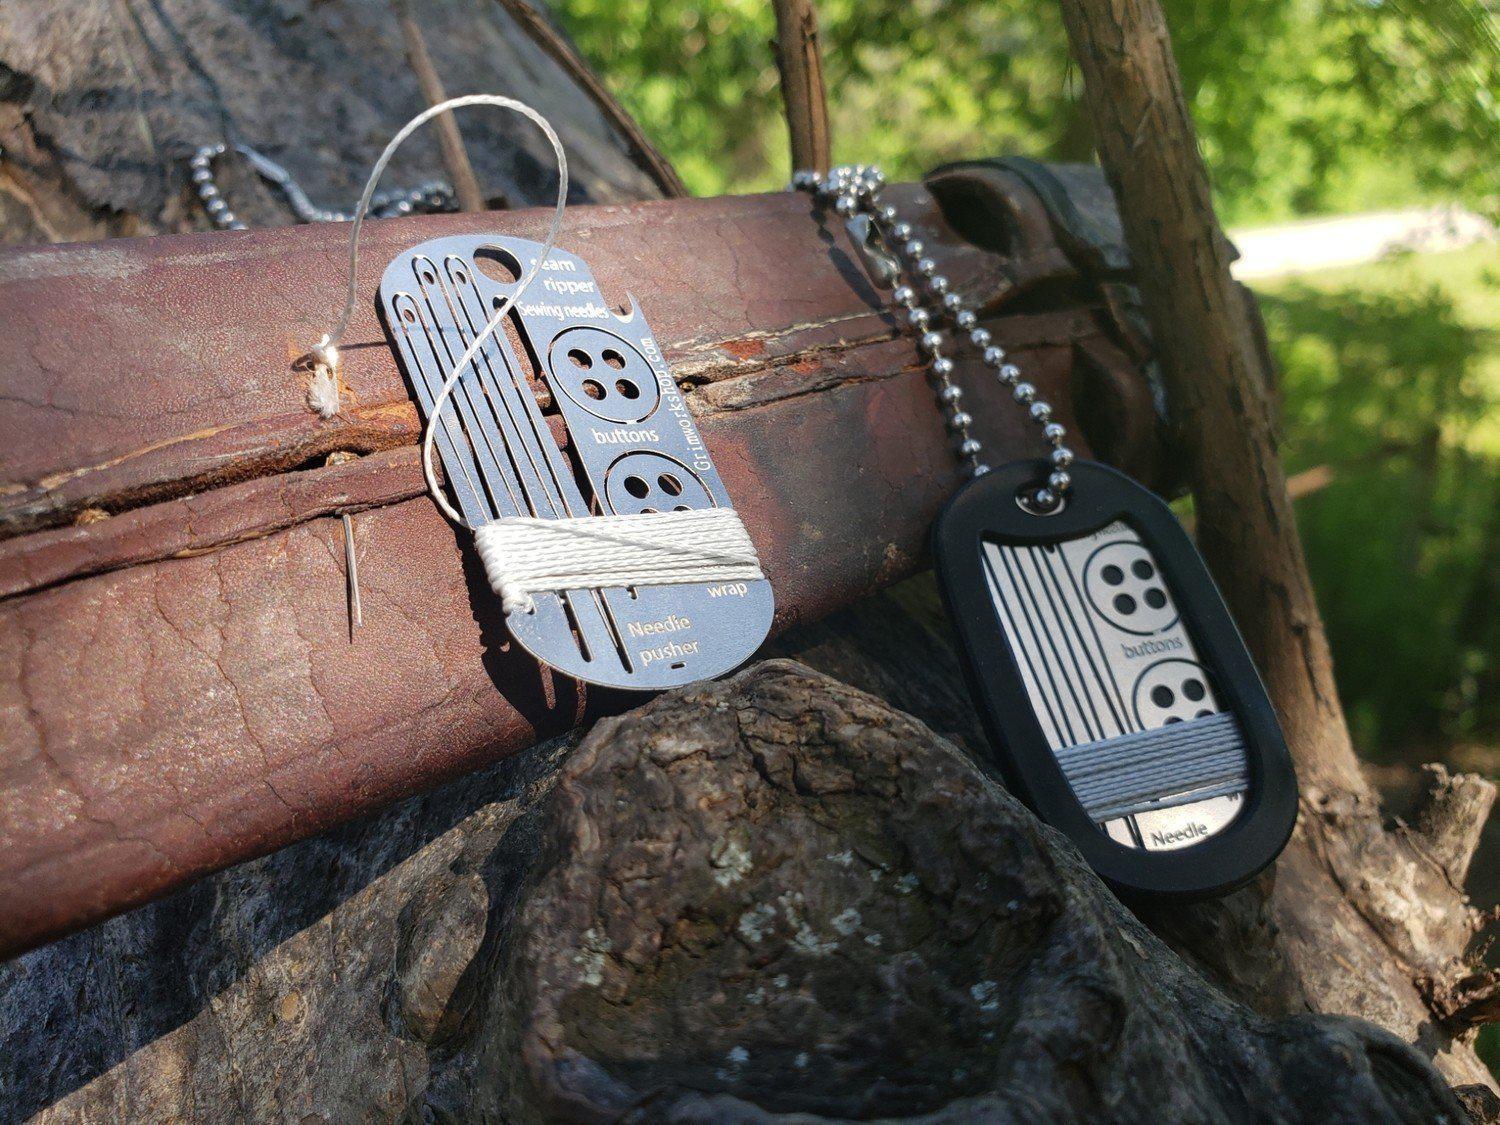 Sewing Kit Dog Tag: Survival Sewing Necklace